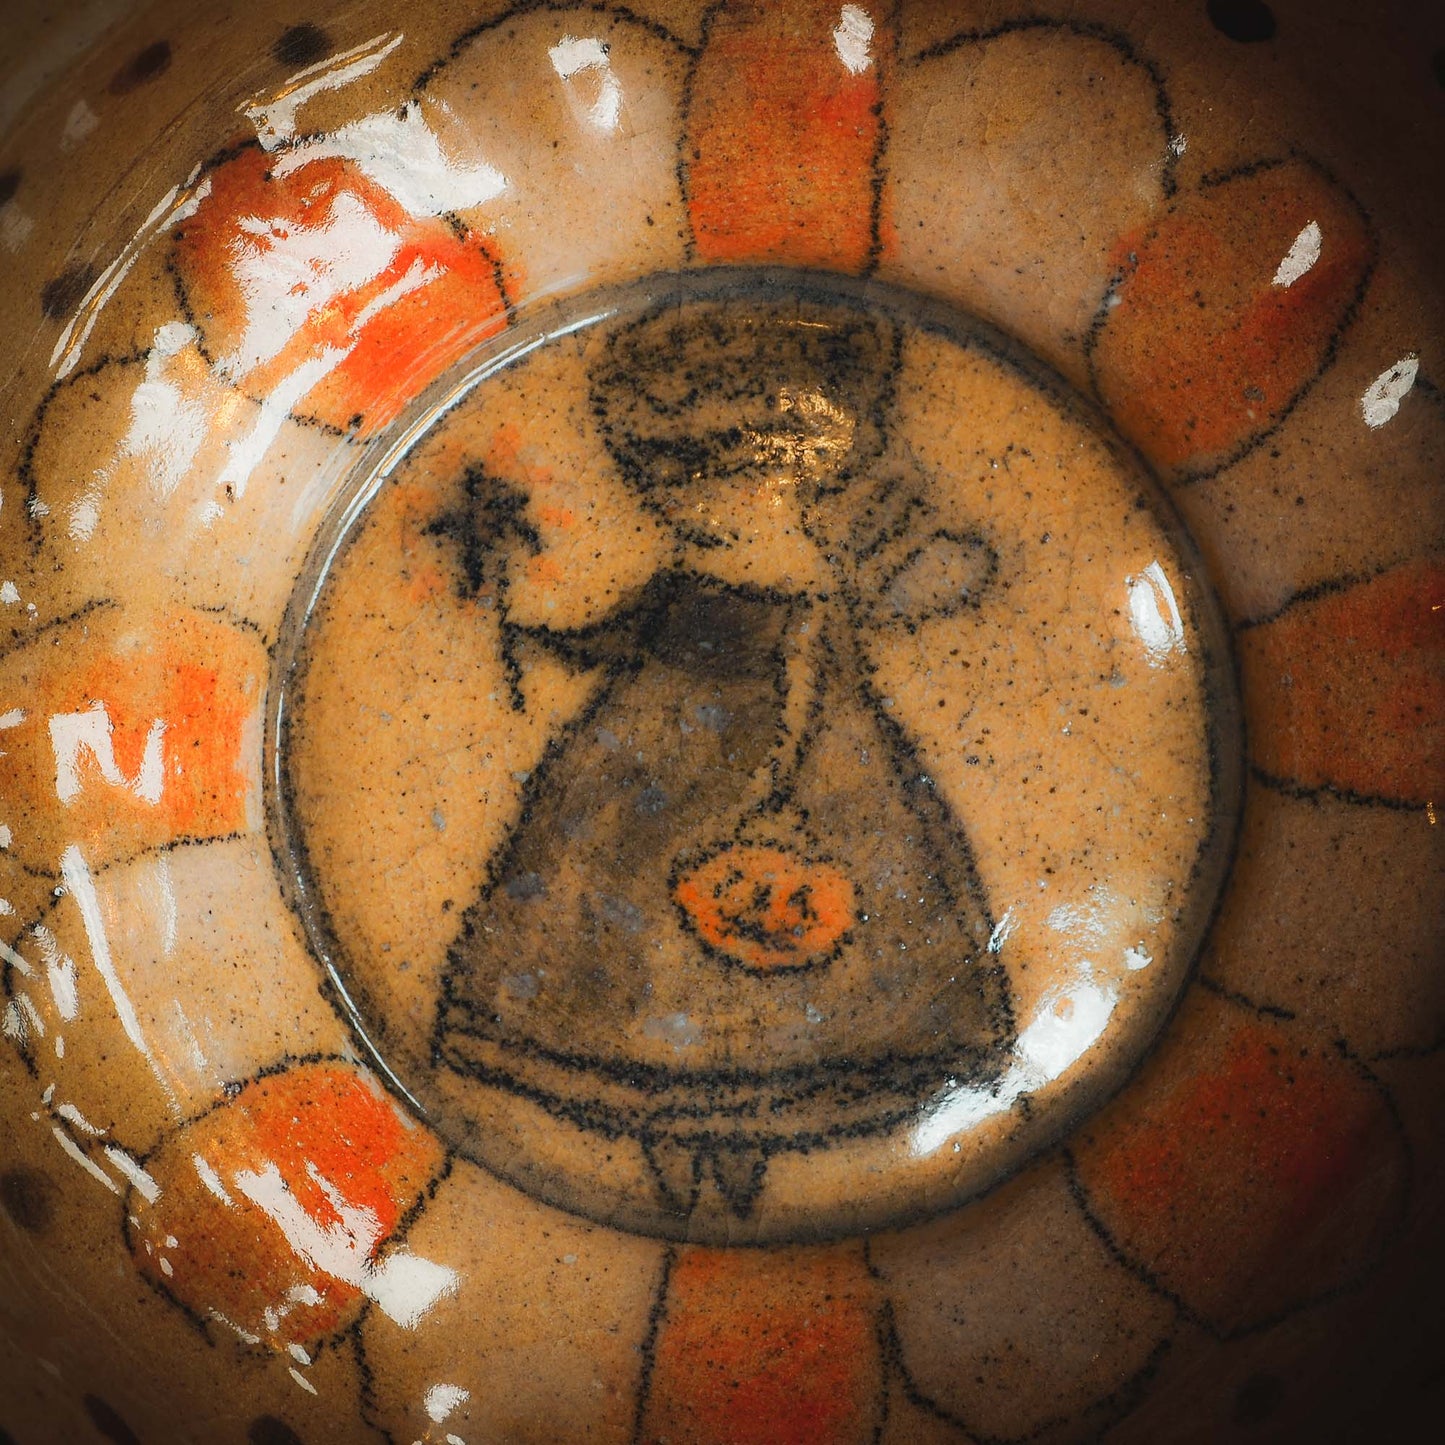 This original handmade Halloween themed glazed ceramic bowl by Idania Salcido, the artist behind Danita Art, features a little Halloween Fairy witch girl is ready to go trick-or-treat on the best holiday of the year. Halloween! You can enjoy your favorite fruits and nuts in it, or maybe a little ice cream ball. Or you can use it to enjoy the candy treasure after going door to door.